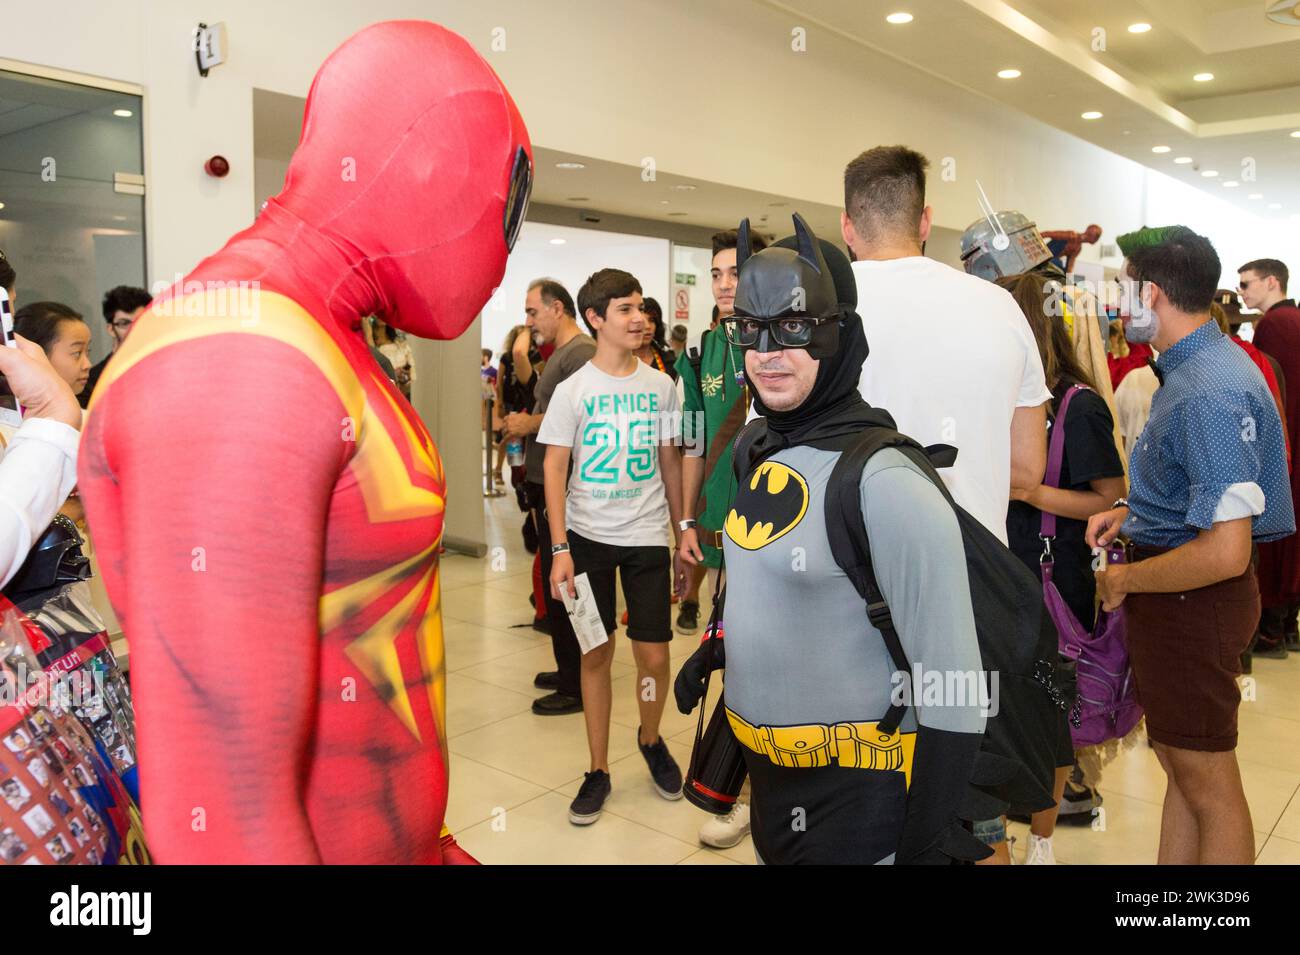 Encounter at the Cyprus Comic Convention in Nicosiasaal Stock Photo